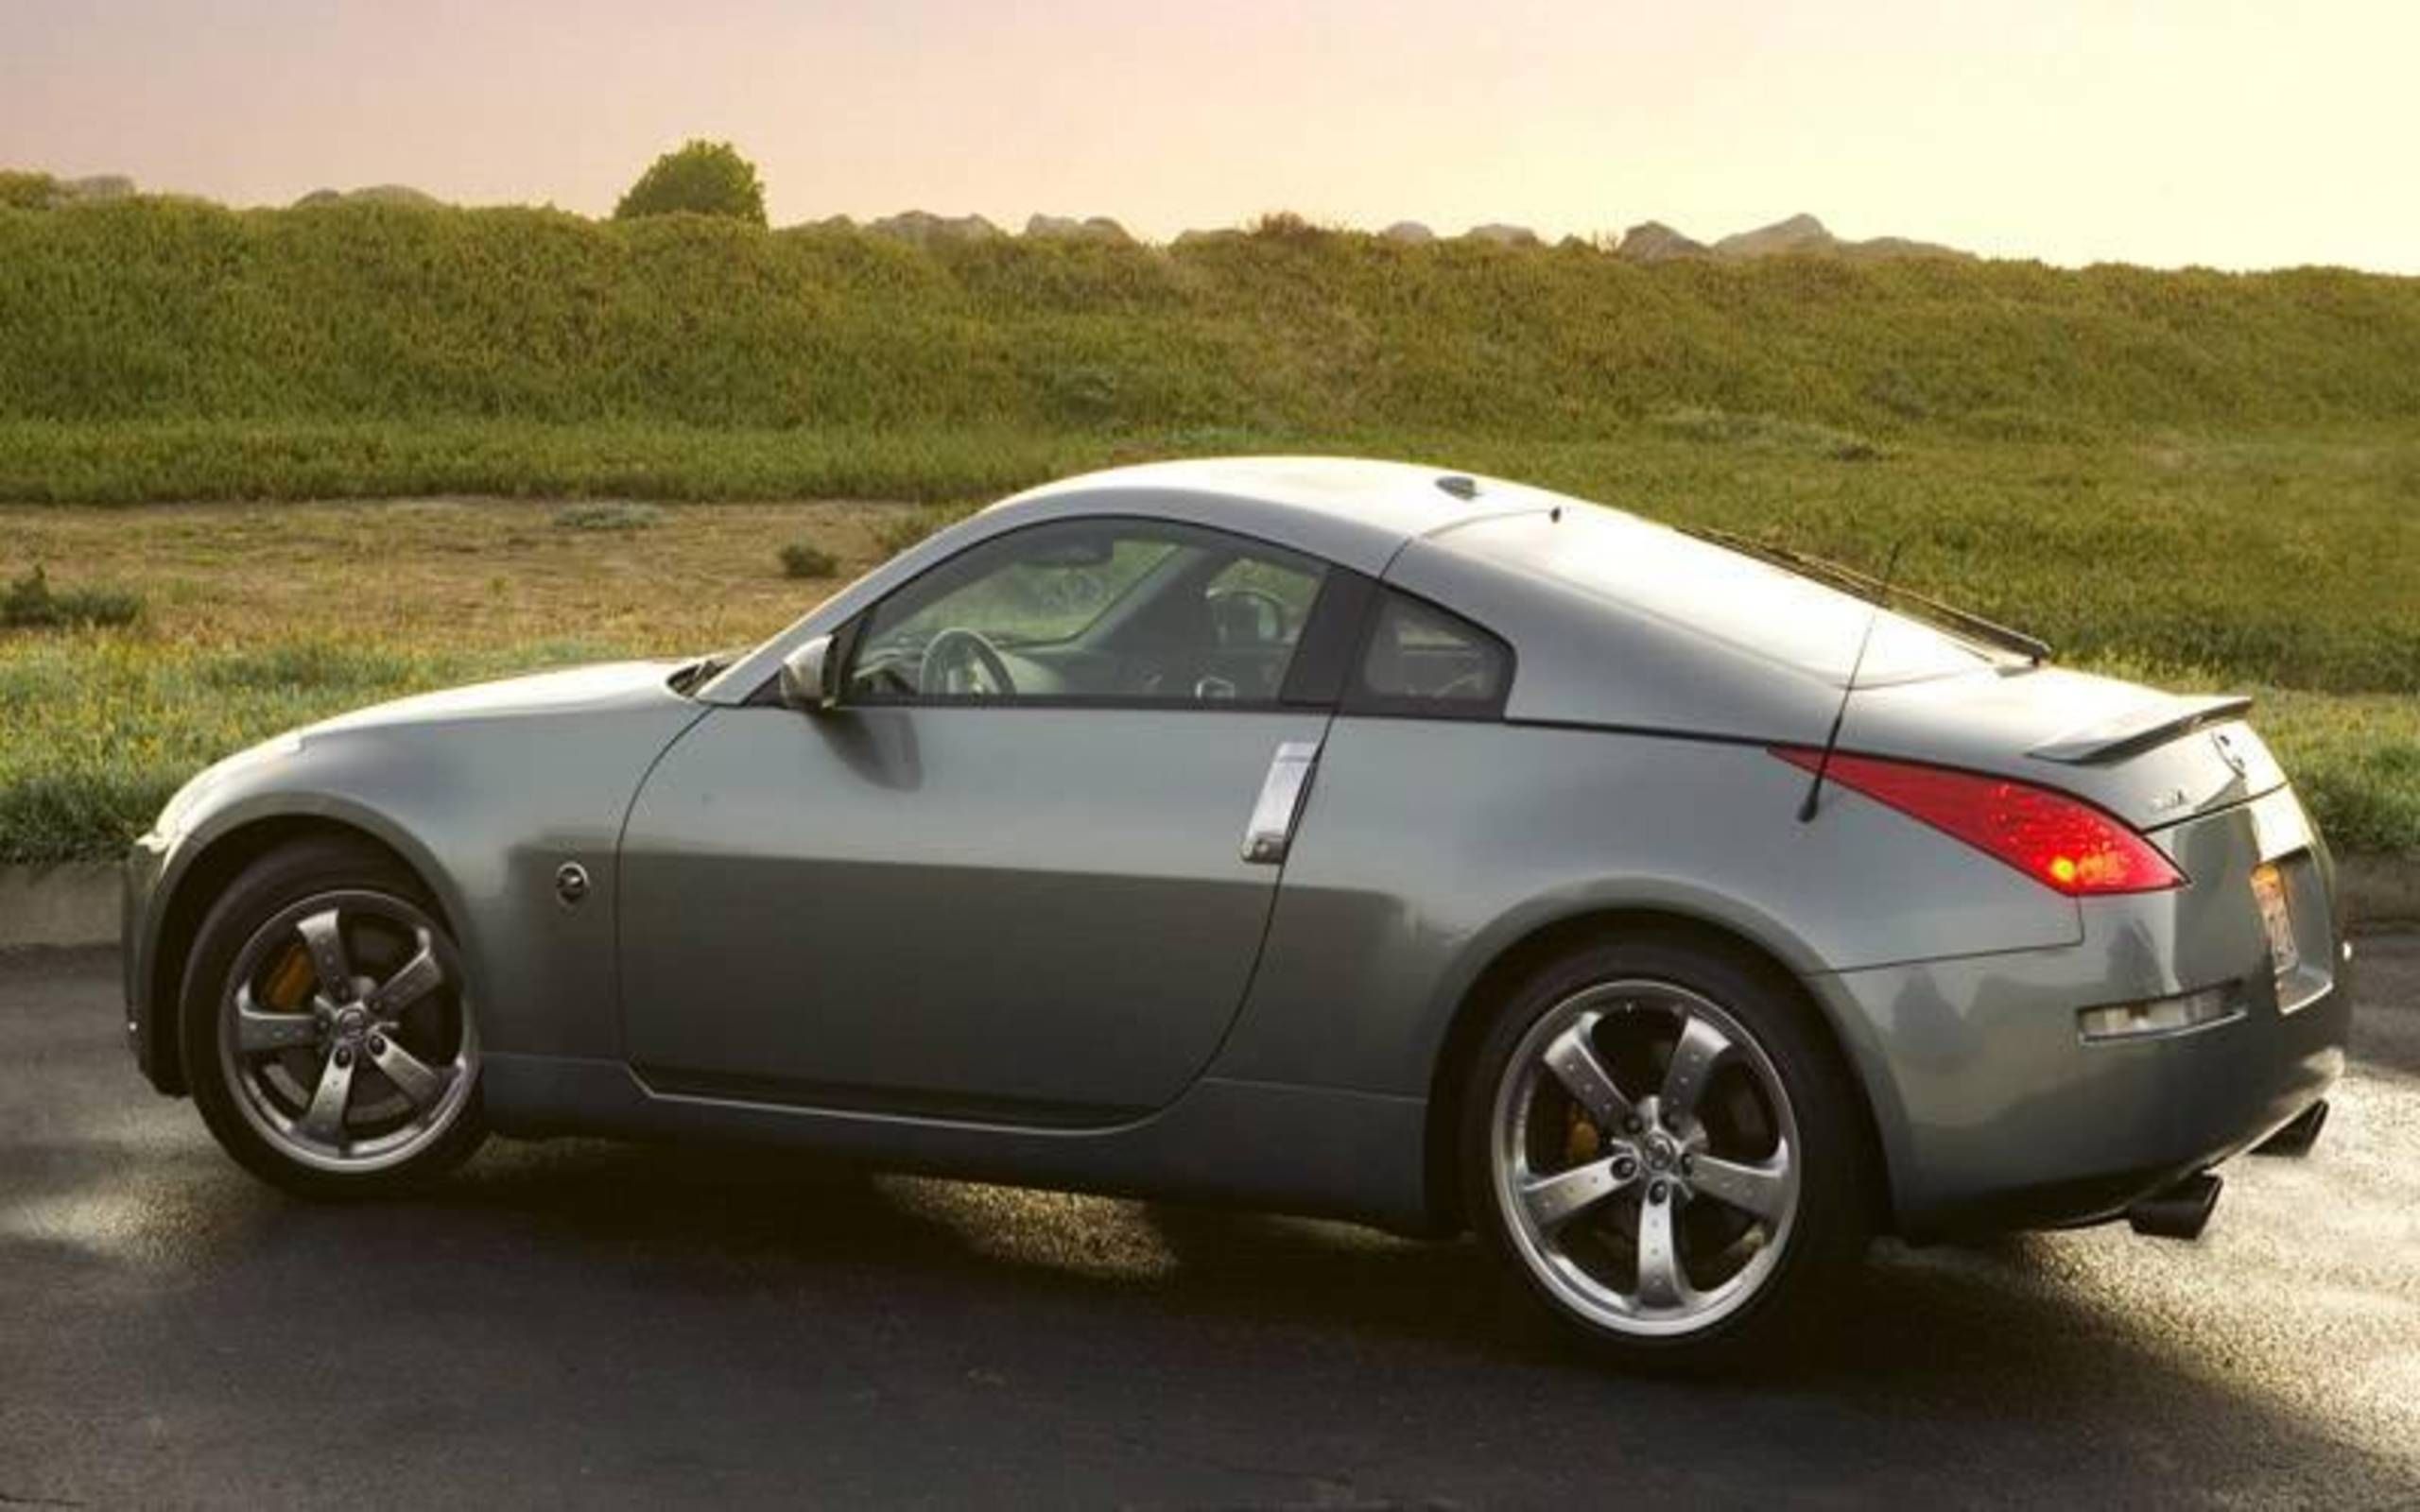 2007 Nissan 350Z: Extensive upgrades for 2007 mean only minor improvements,  but Z is still the last letter in affordable sports cars